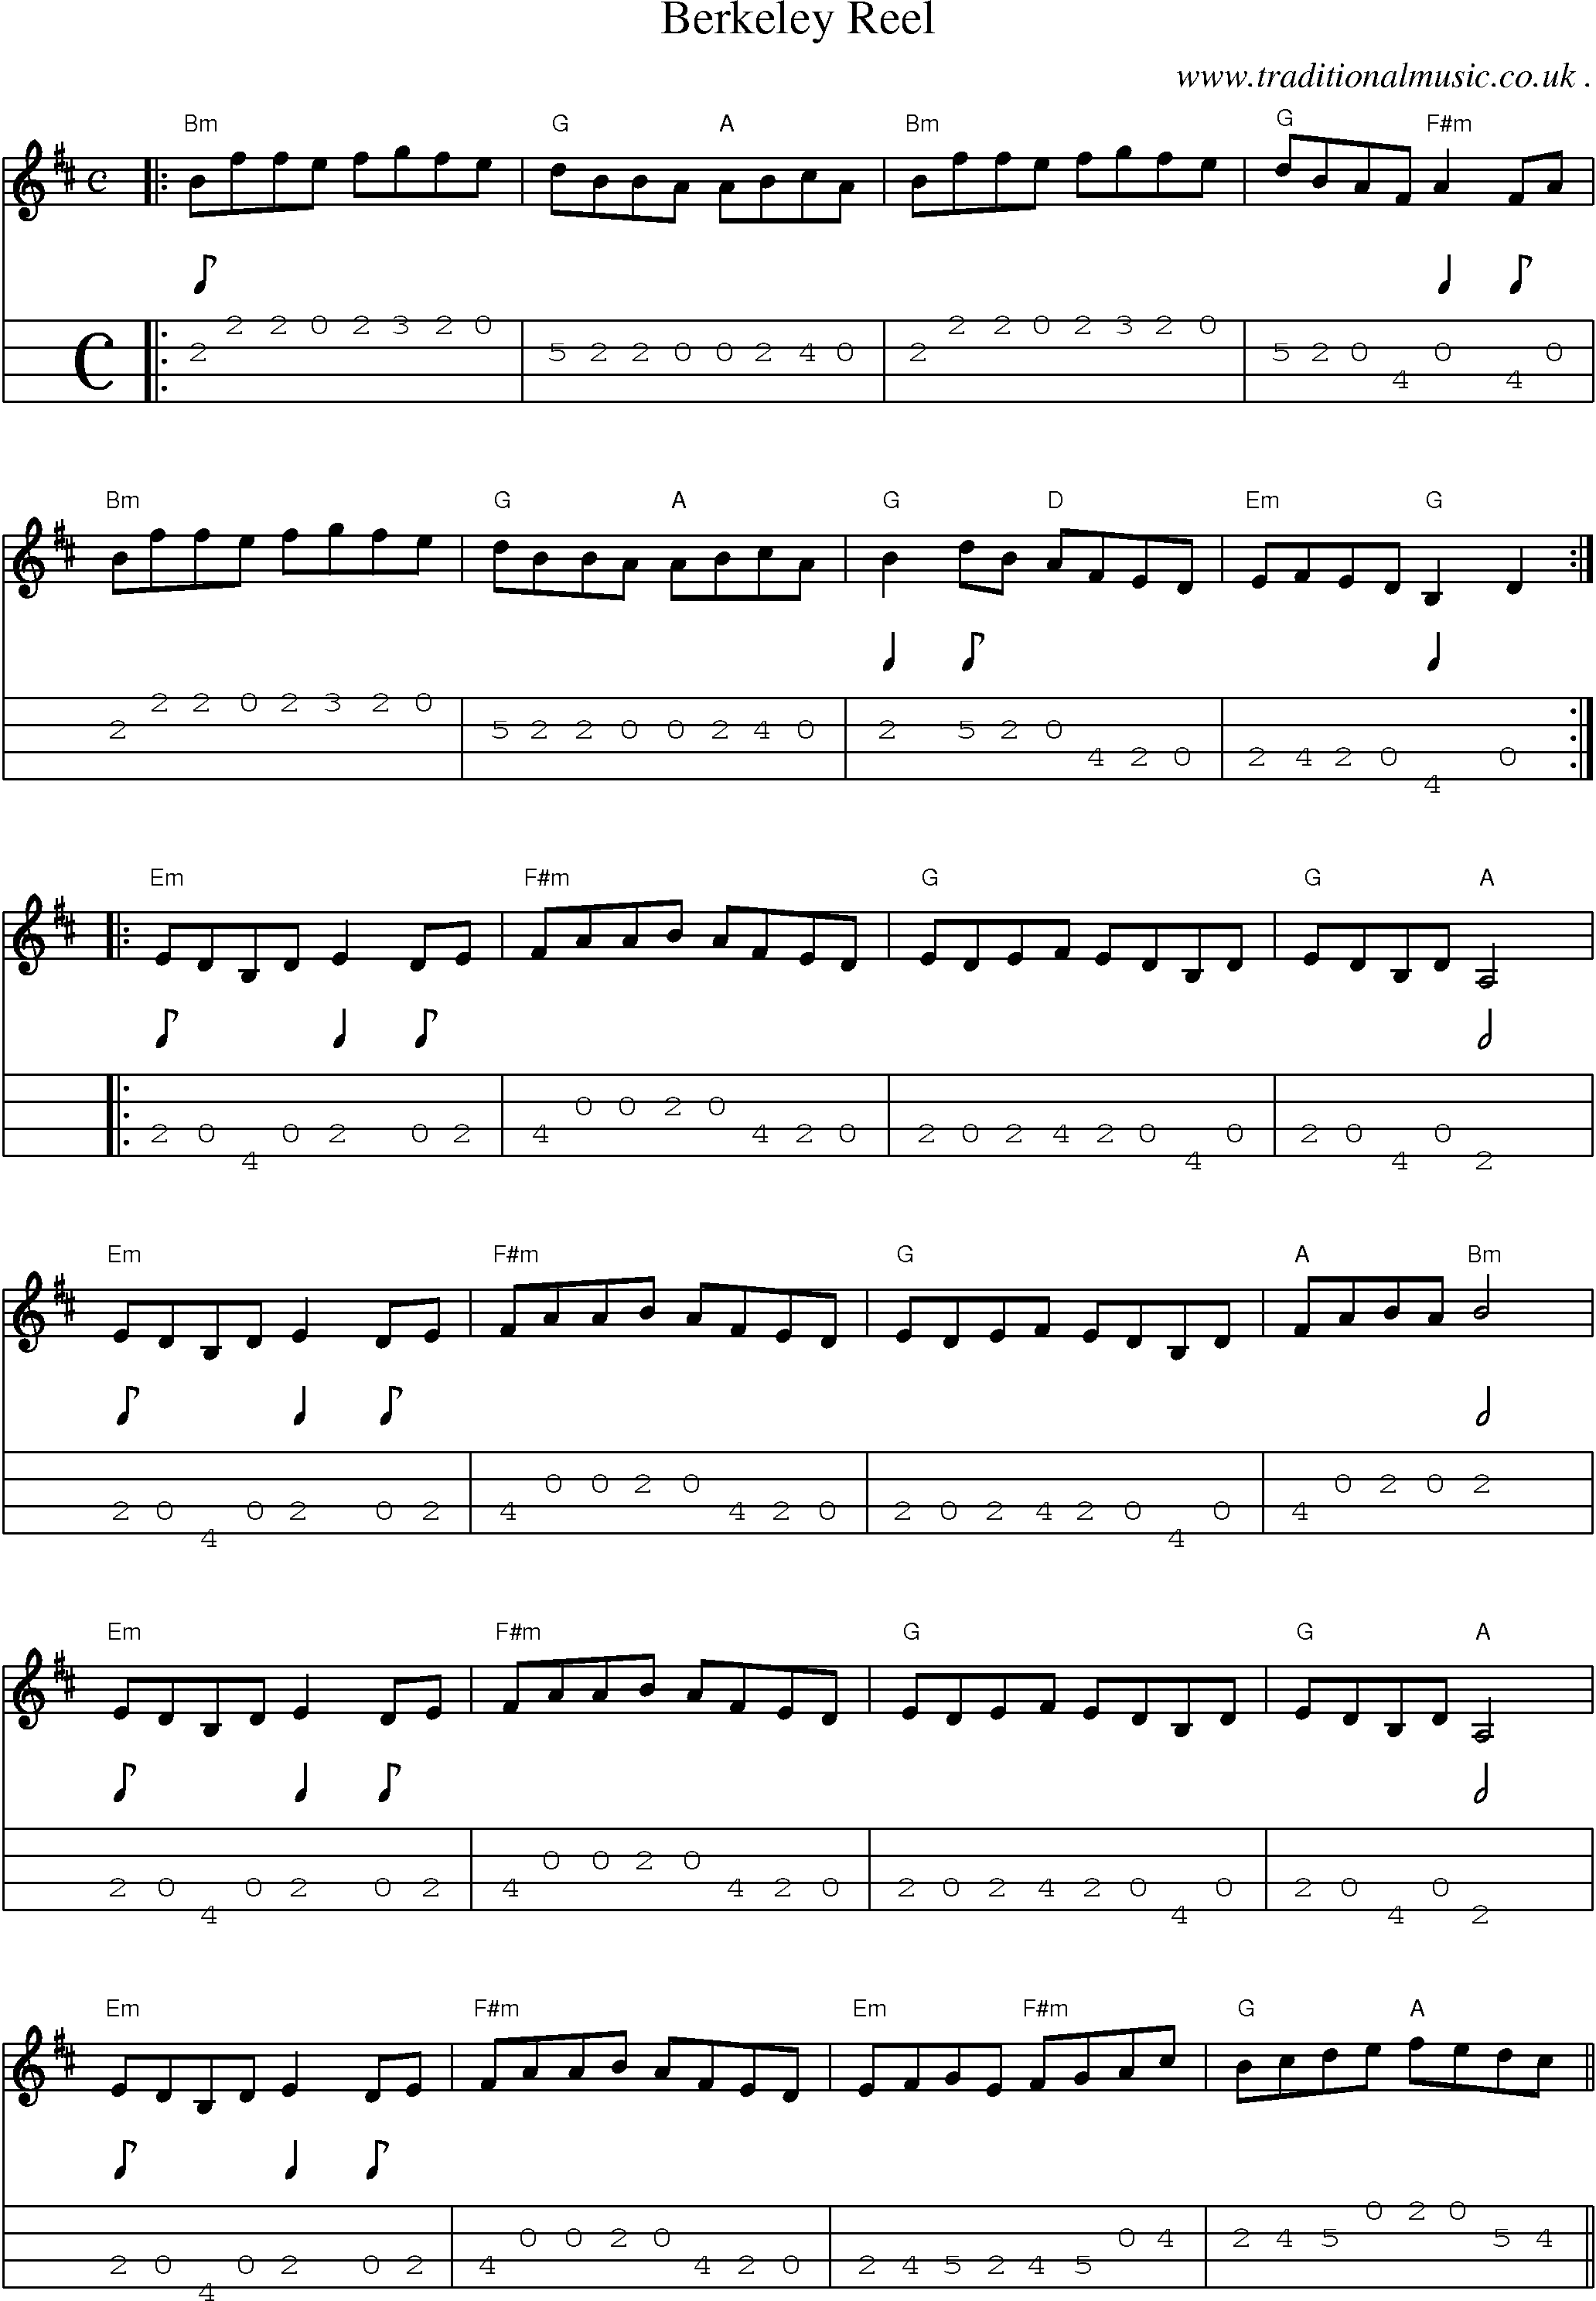 Music Score and Mandolin Tabs for Berkeley Reel